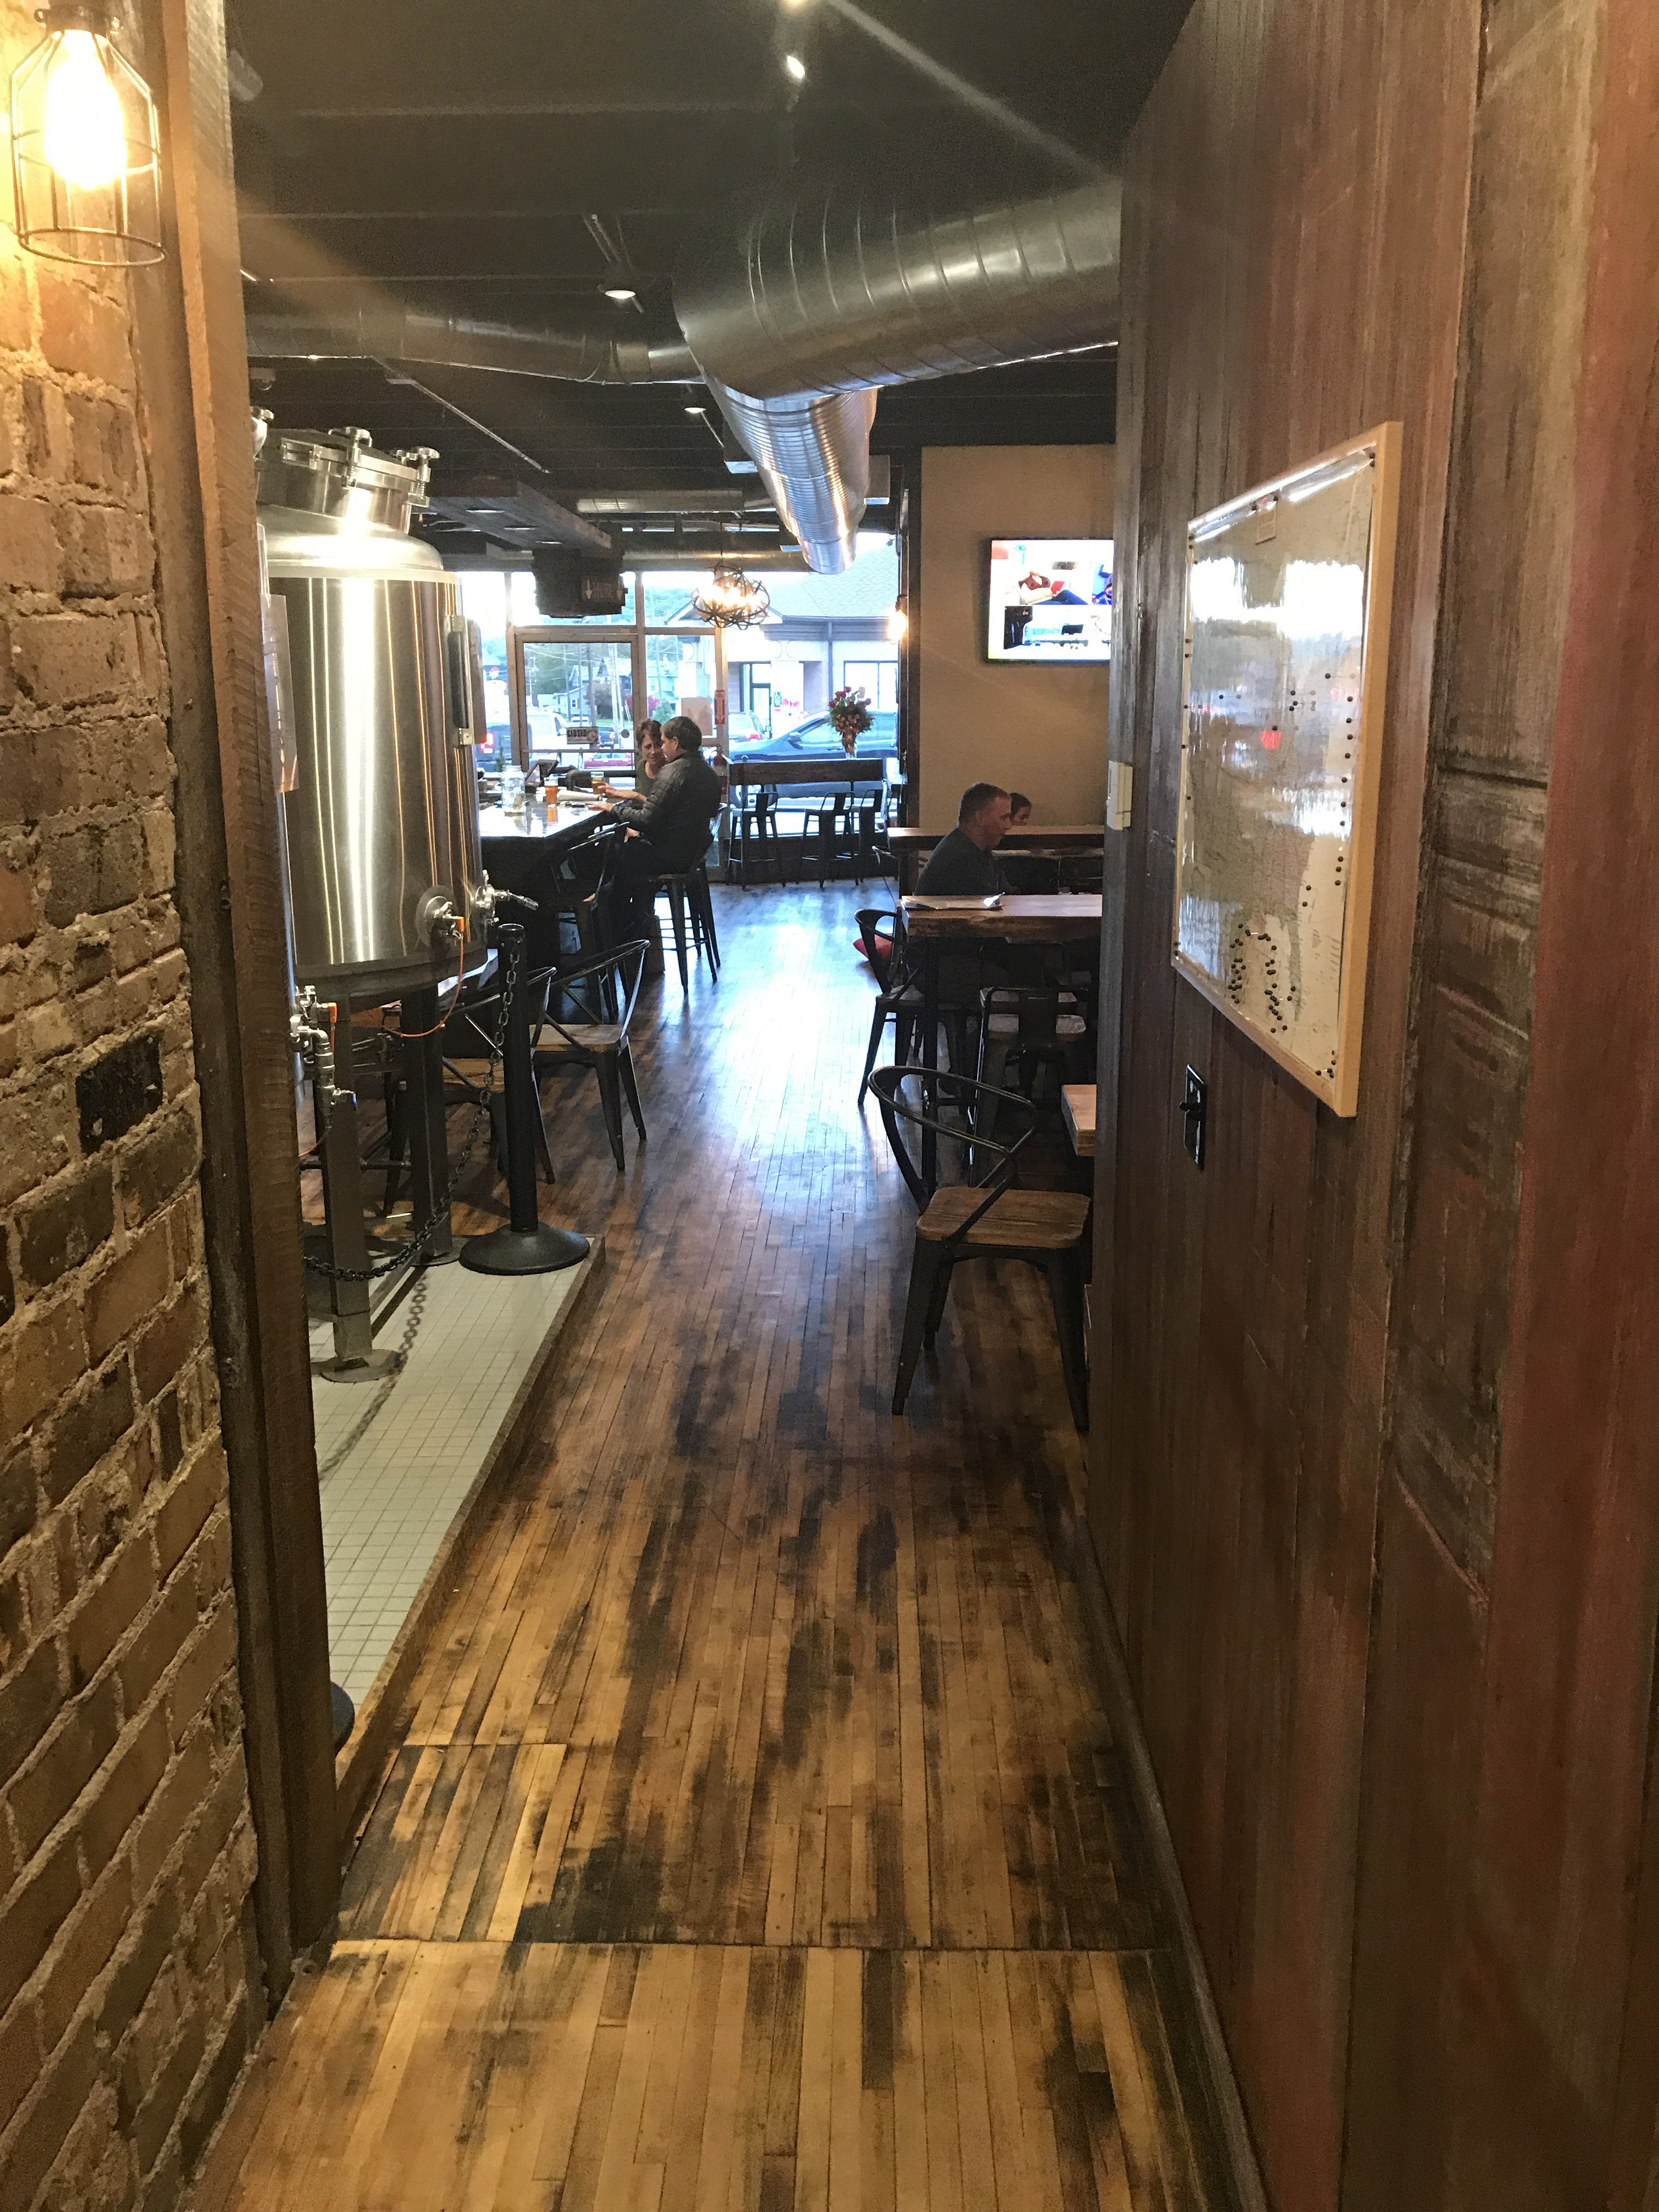 Hardwood Floor Refinishing toledo Ohio Of Rtittel Page 6 northeast Ohio Craft Brewery News In A Side Door Leads Out to A Fenced In Patio which Has Beautiful Tables Made Of Reclaimed Wood with Pipe Legs Those Tables are Actually for Sale if Anyone